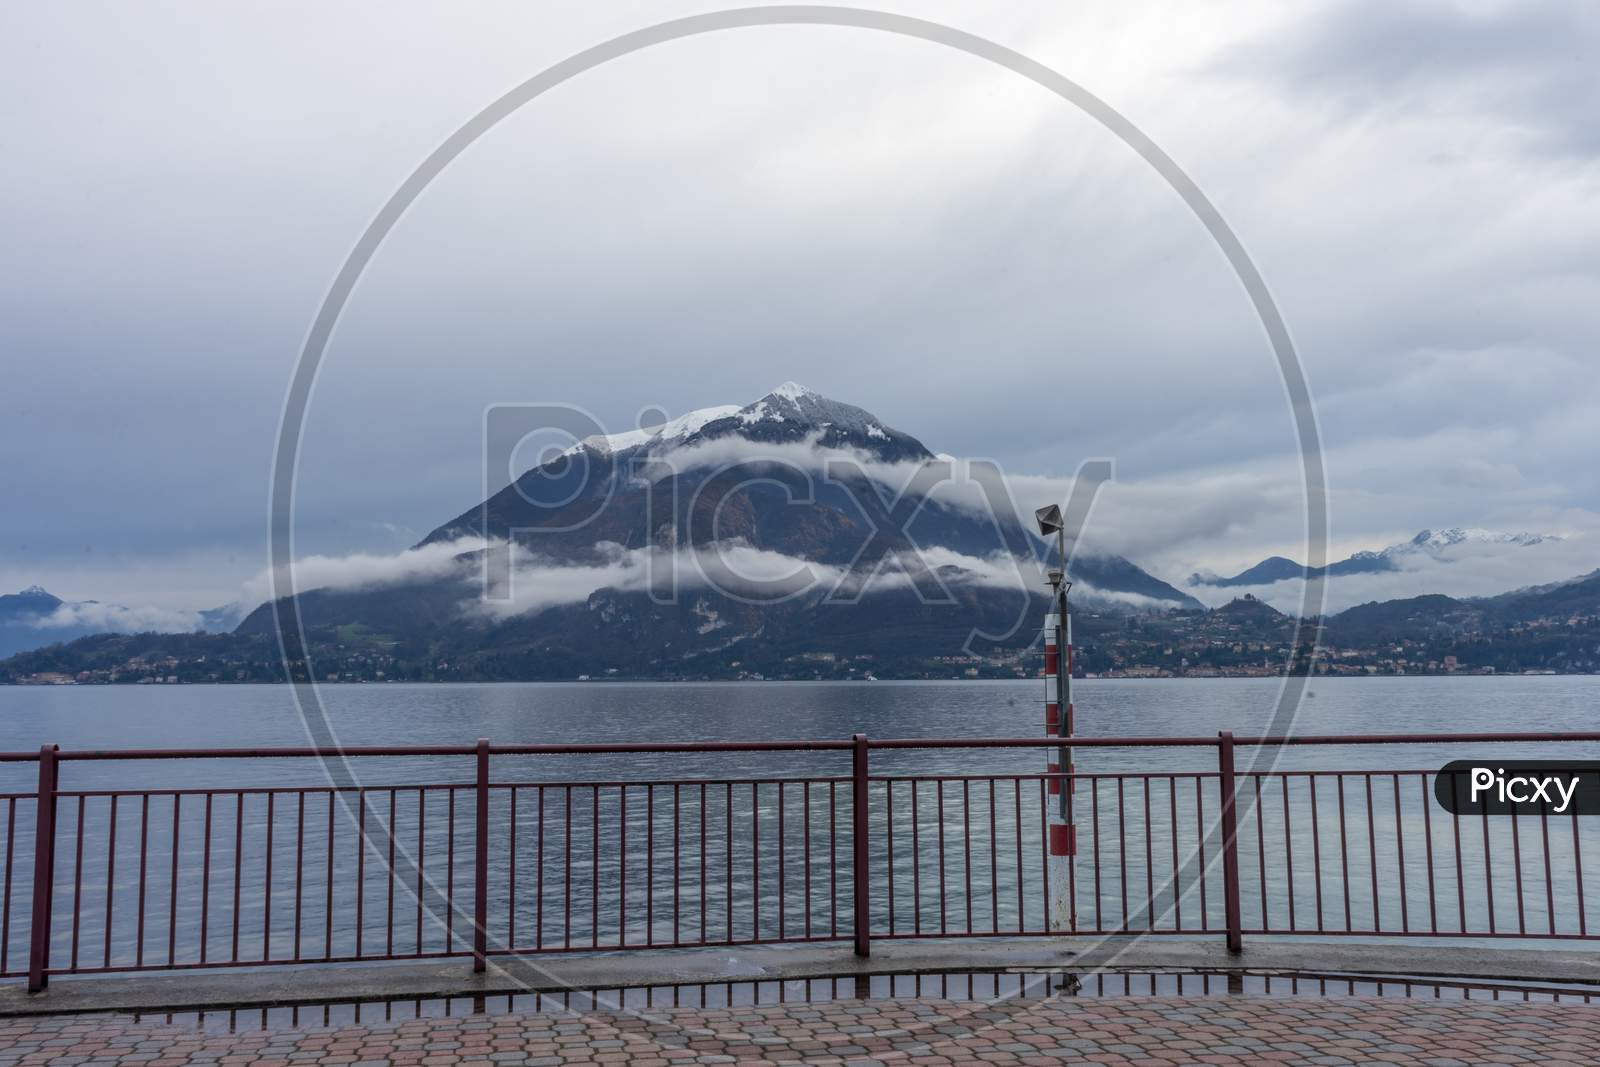 Italy, Varenna, Lake Como, A Body Of Water With A Snowcap Mountain In Front Of A Fence